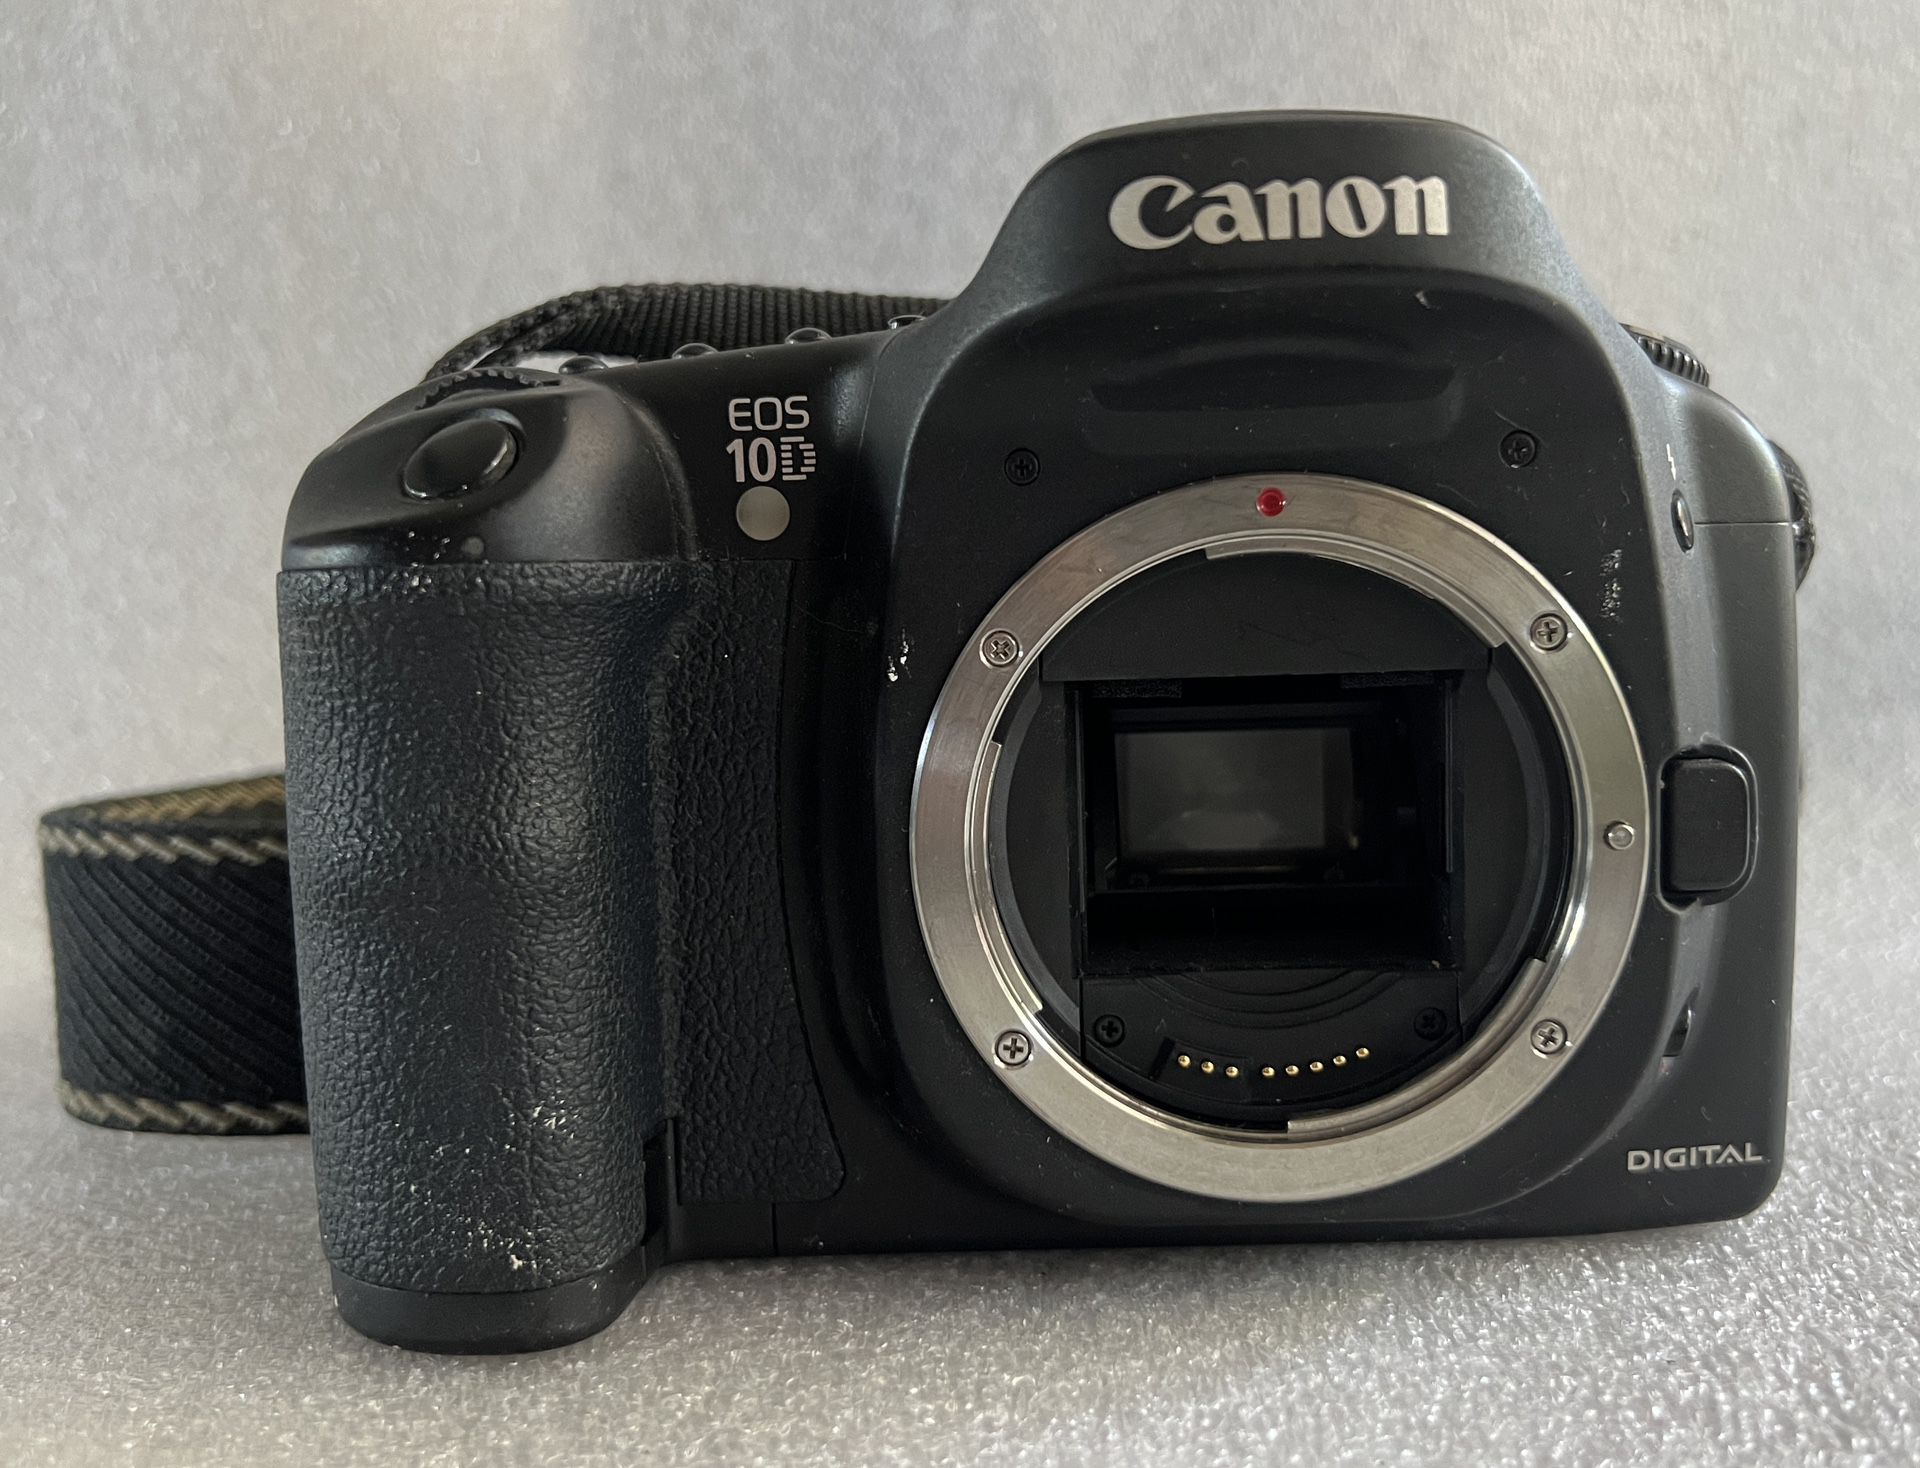 Canon EOS 10D 6.3MP Digital SLR Camera Body Only DS6031 UNTESTED 